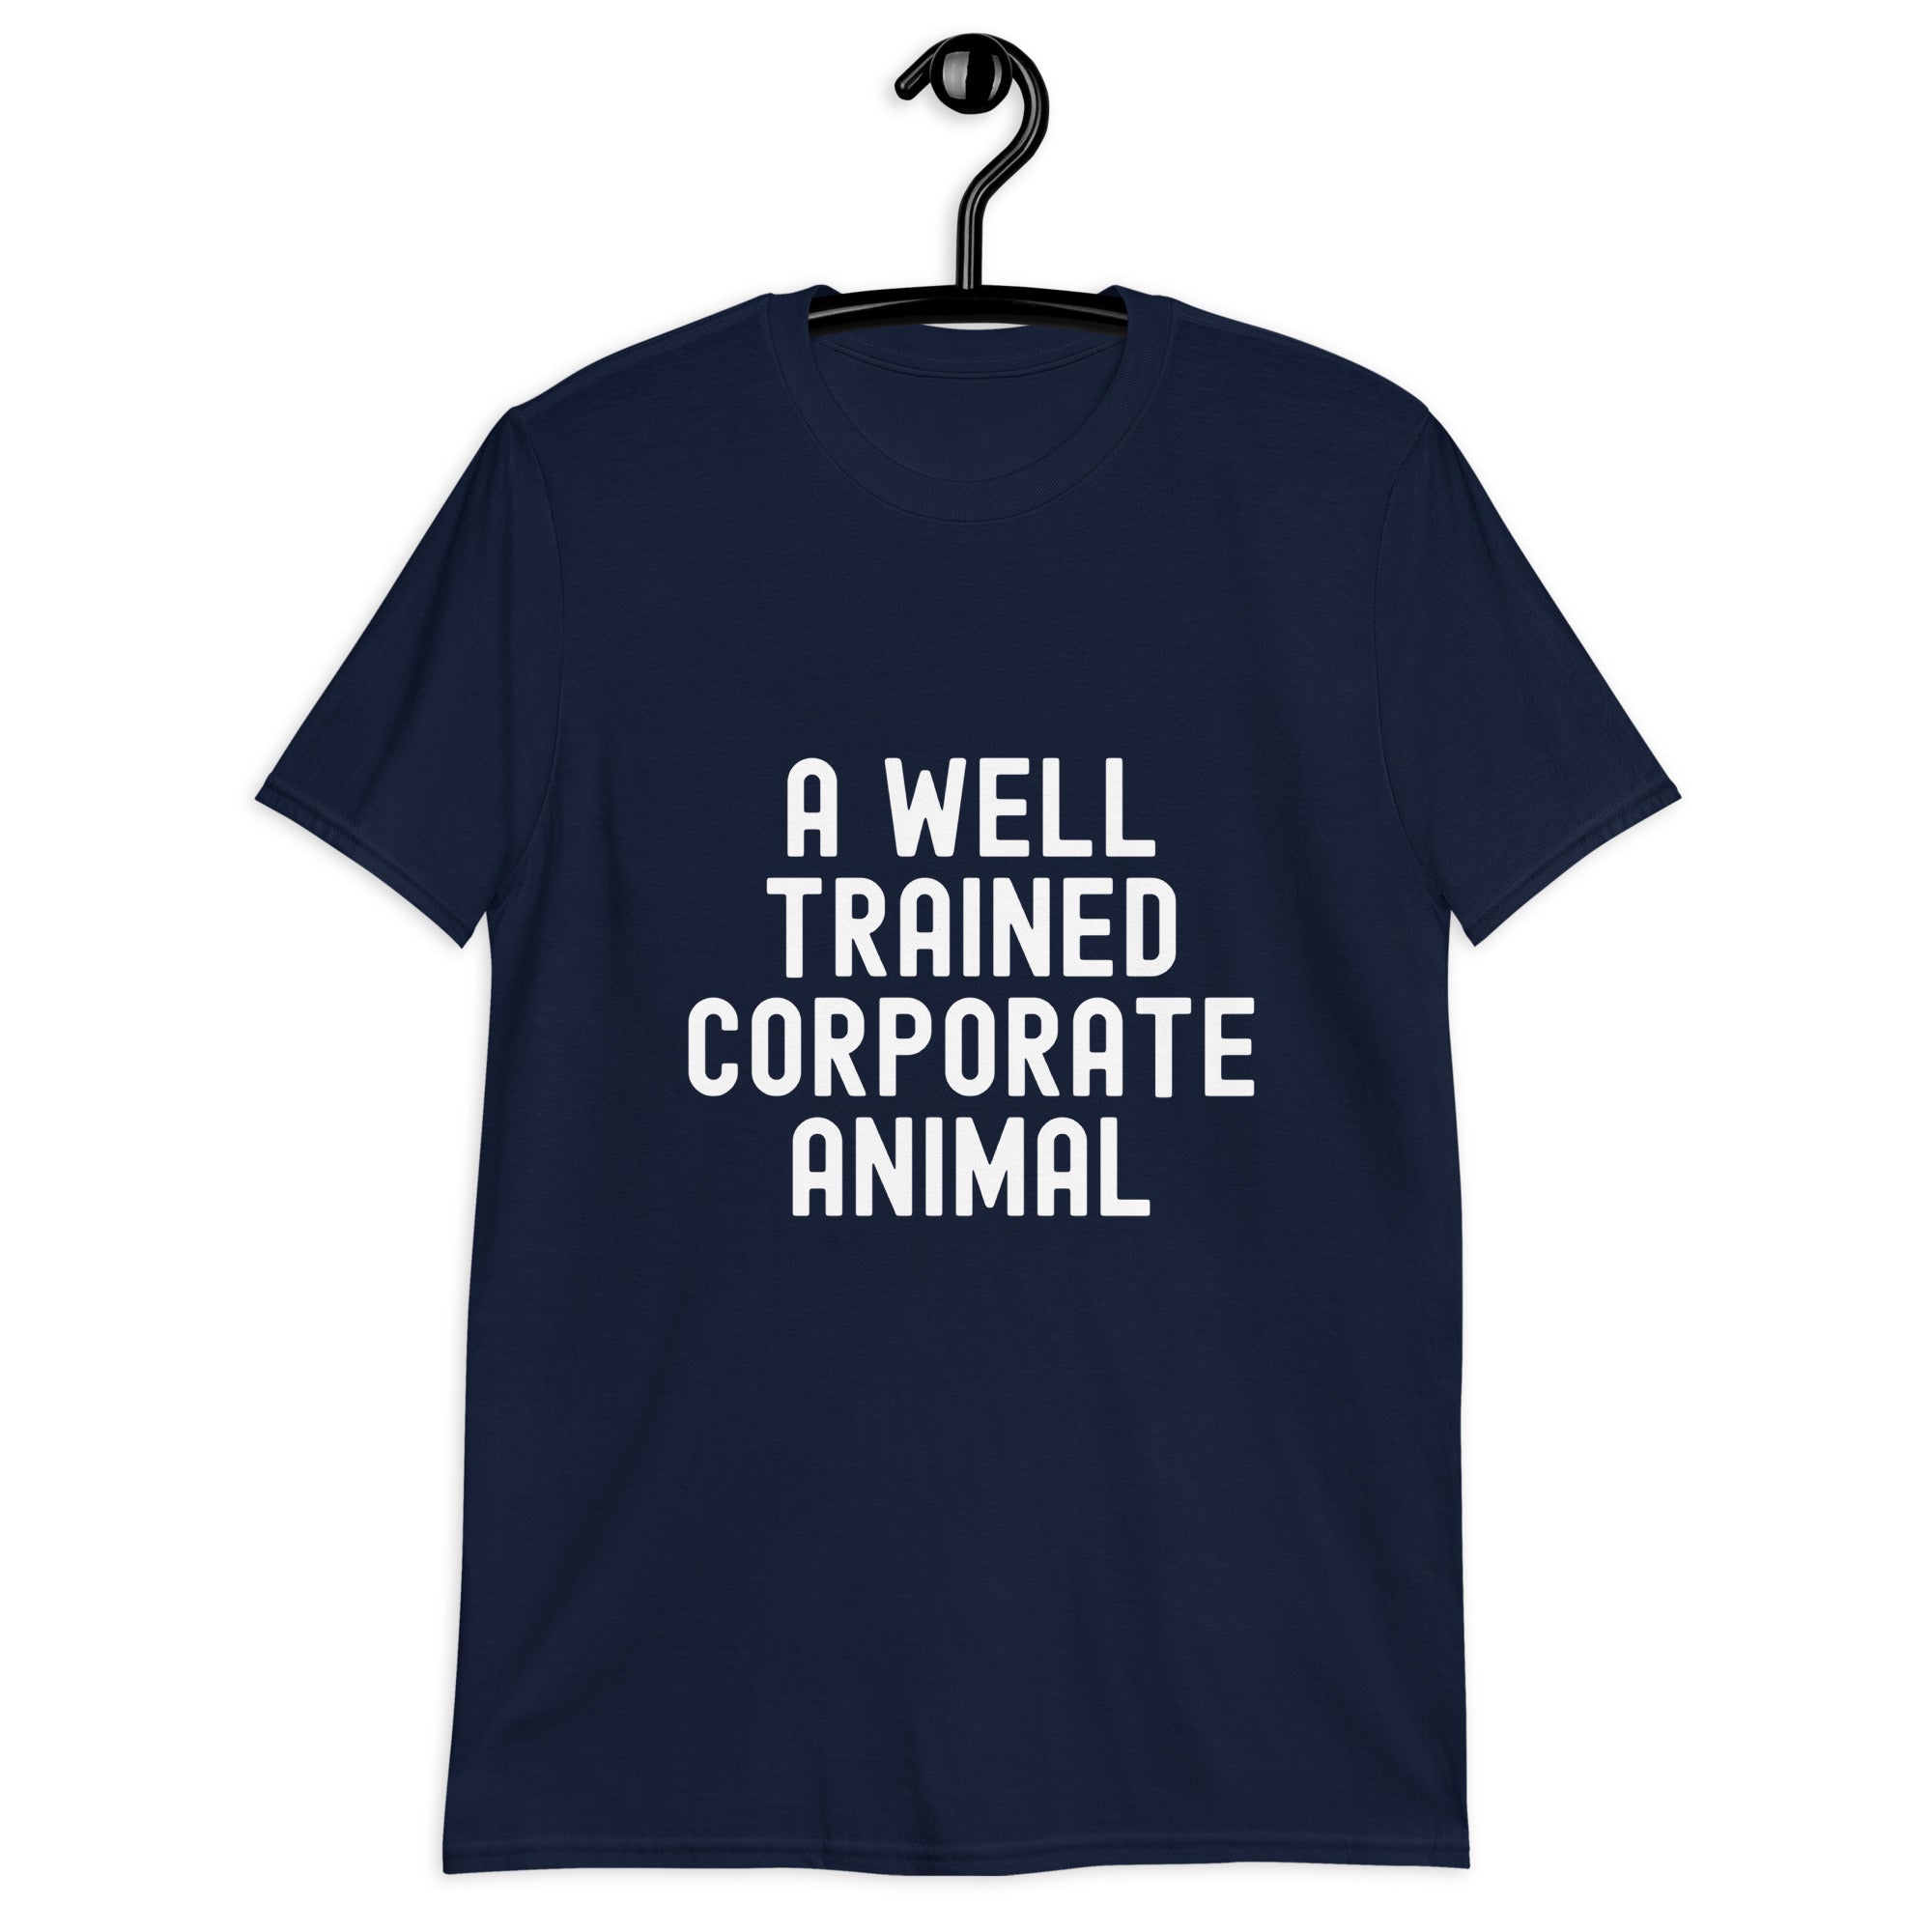 Short-Sleeve Unisex T-Shirt | A well trained corporate animal